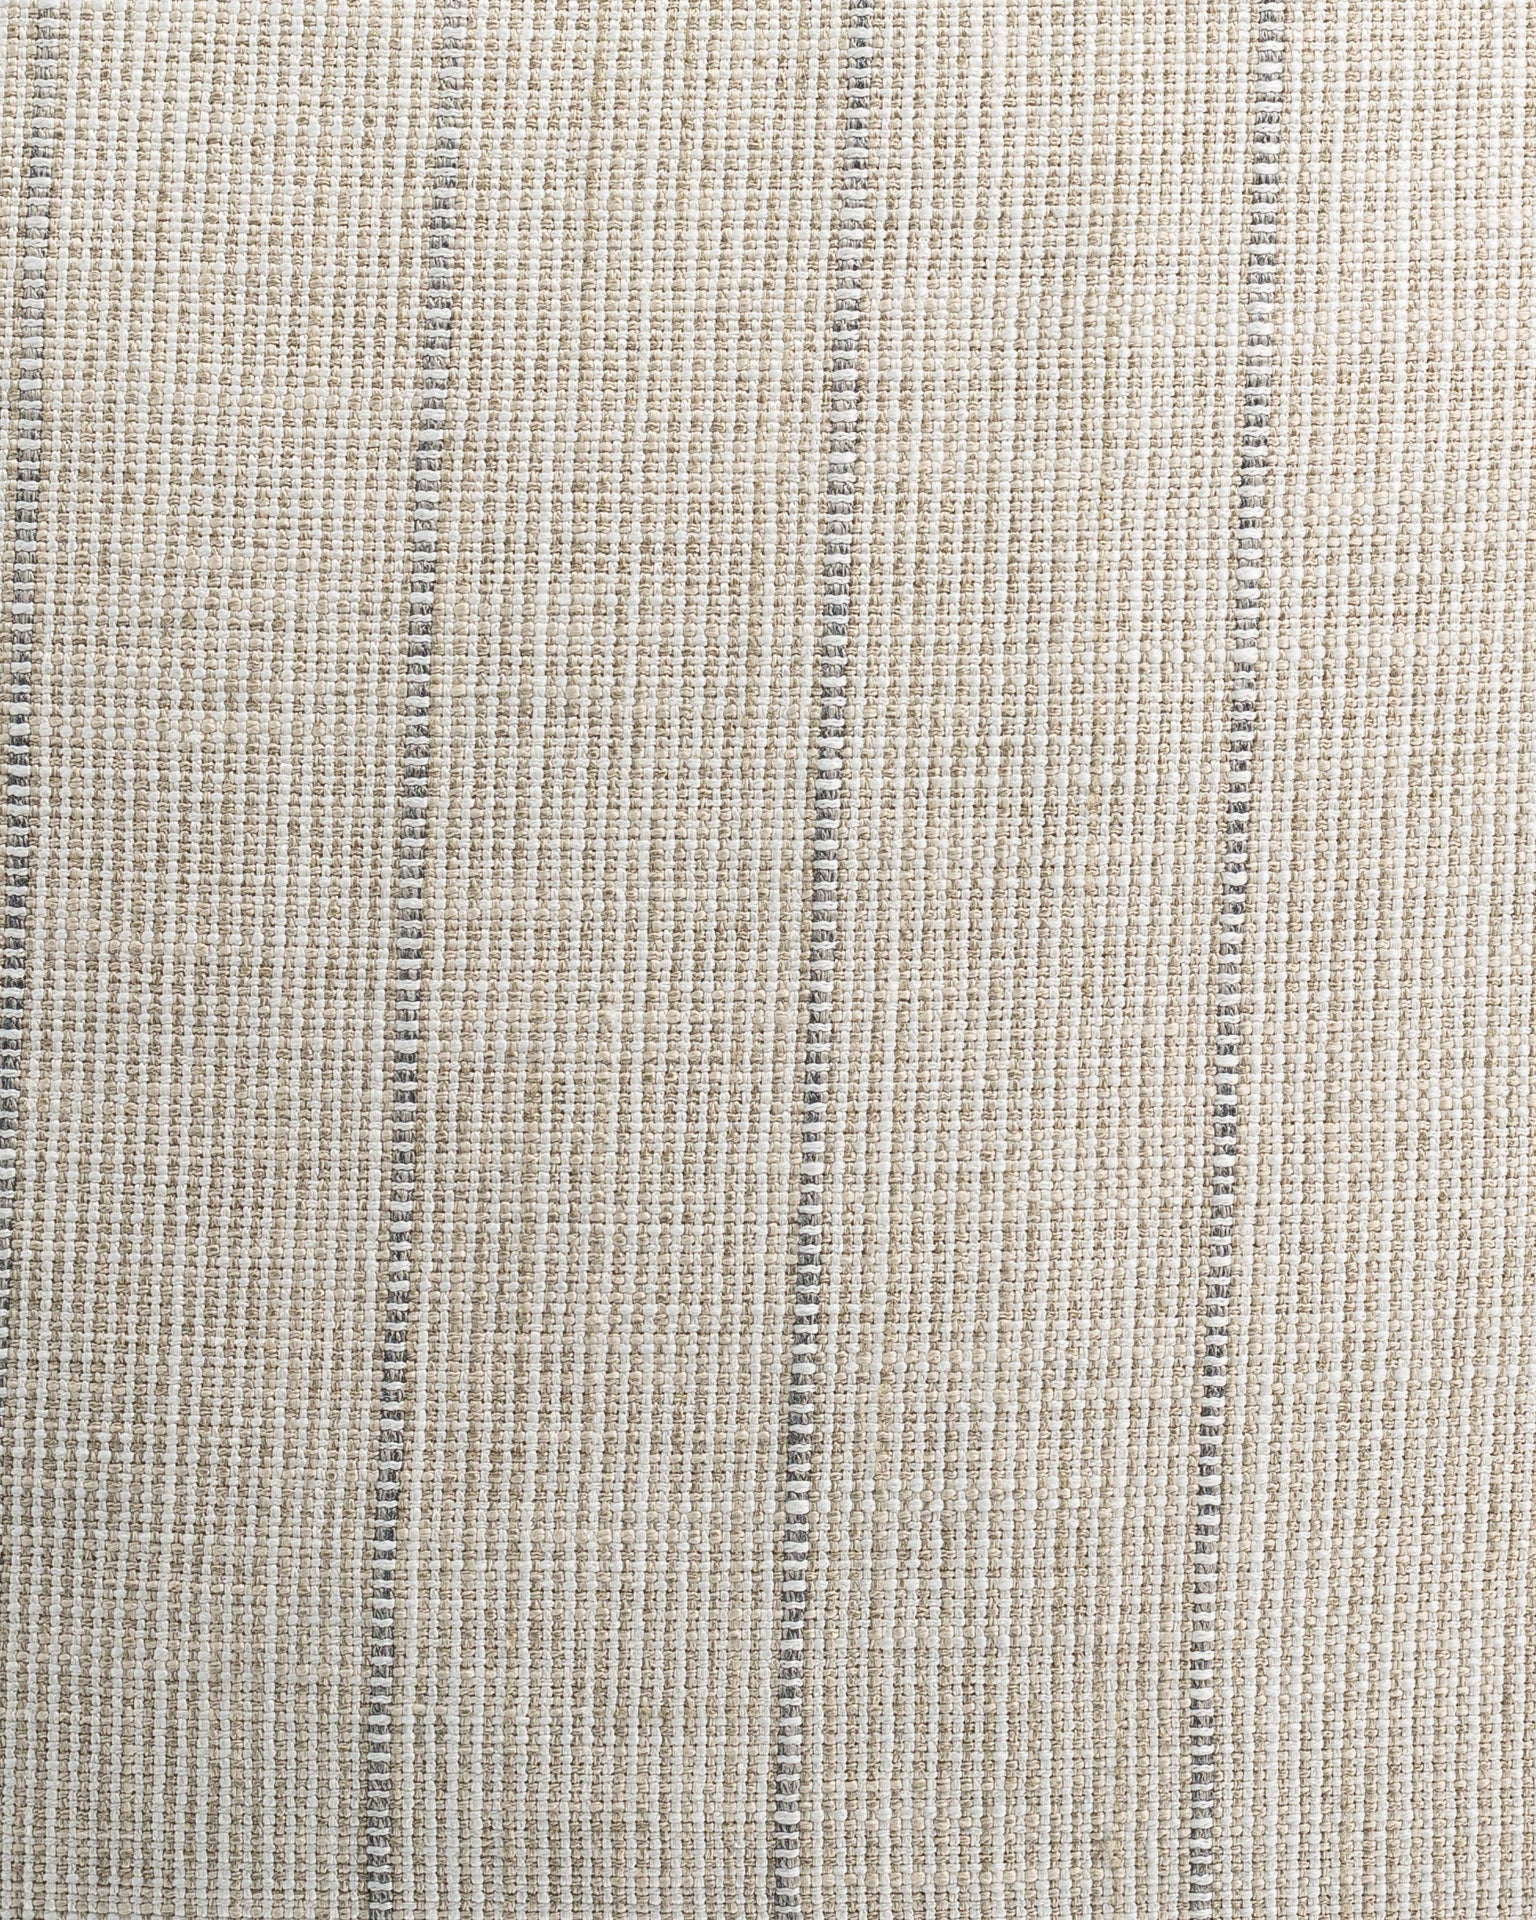 Close-up view of a Gabby Reed Stripe Silver Pillow 26x26 featuring parallel ridged lines in a neutral beige color, demonstrating a detailed woven pattern typical of Arizona style.